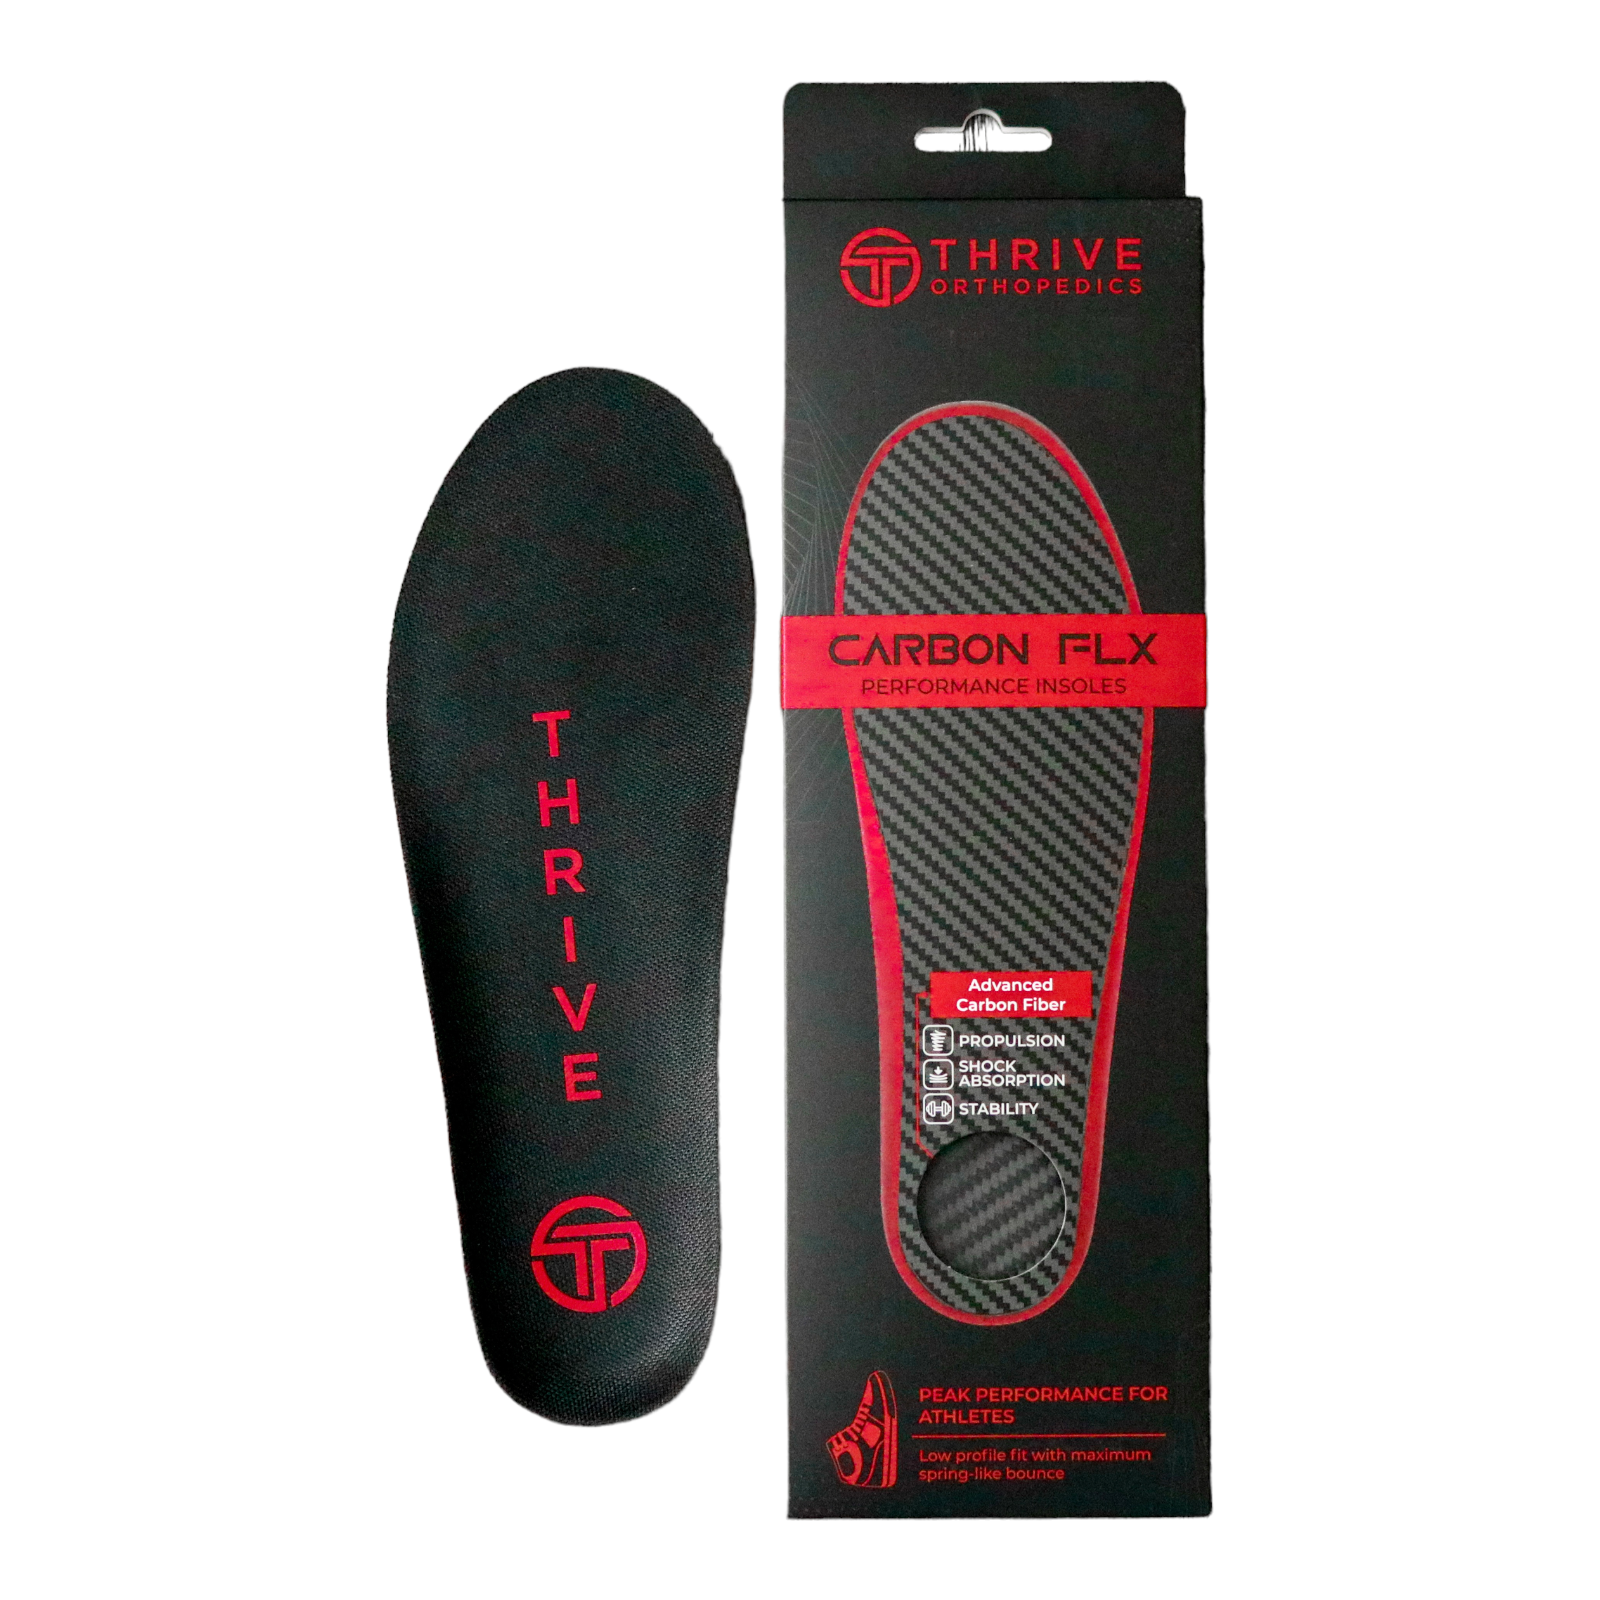 Carbon FLX Performance Insoles  from $99.99 at Thrive Orthopedics